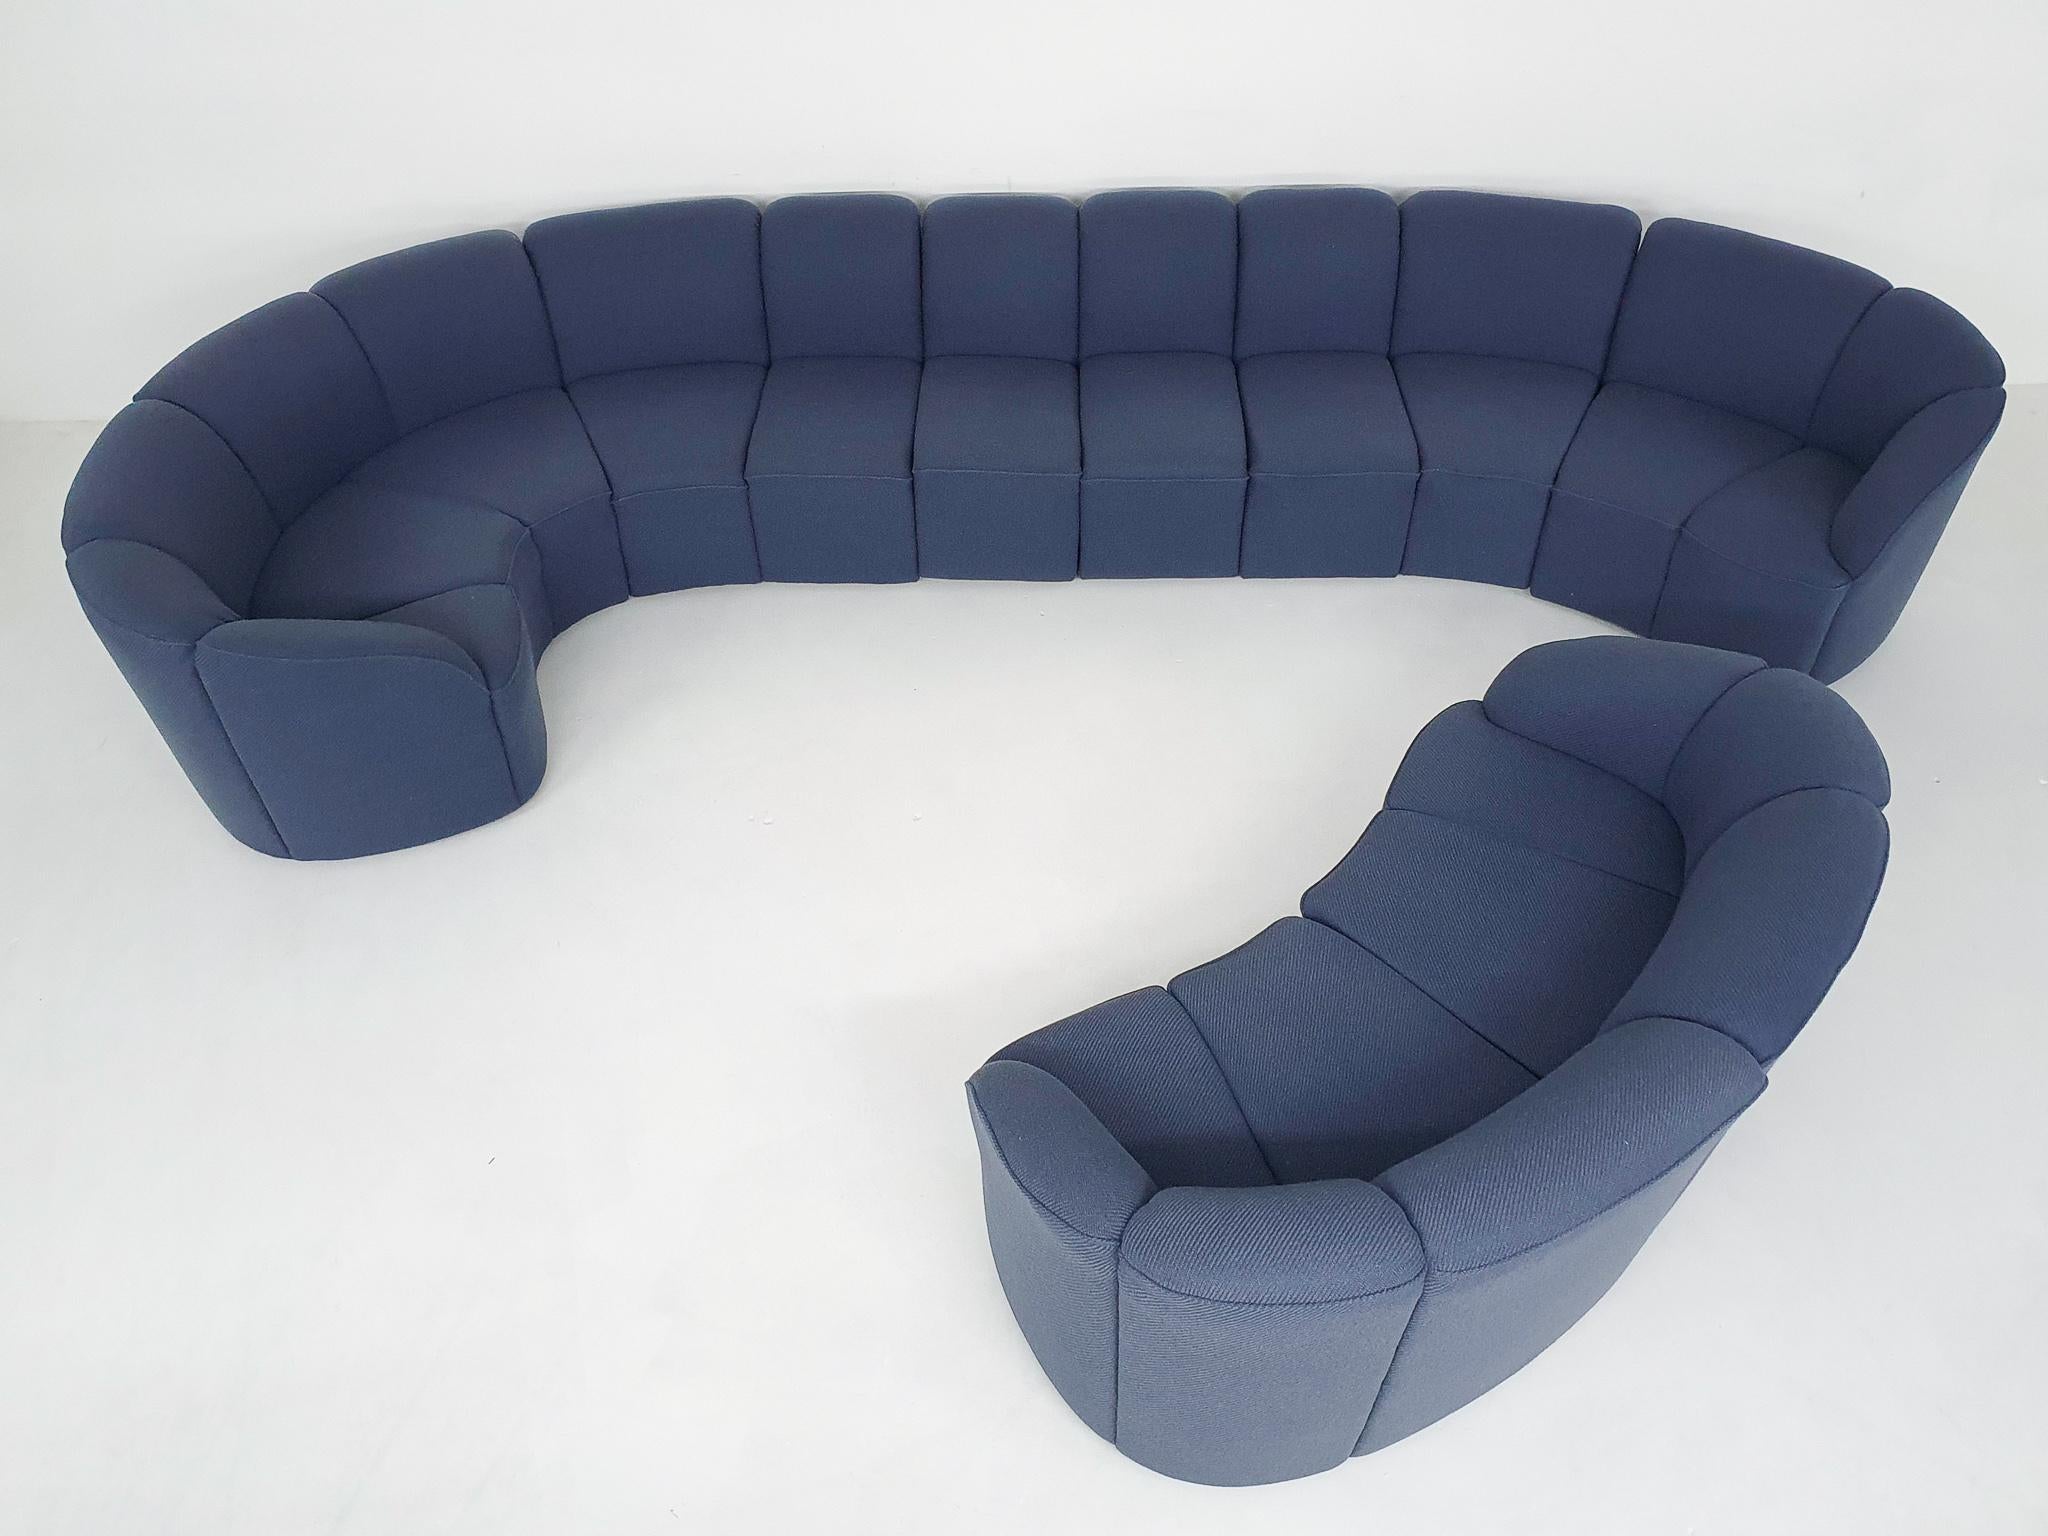 Elegant modular sofa from the 1960s by Walter Knoll. Model 